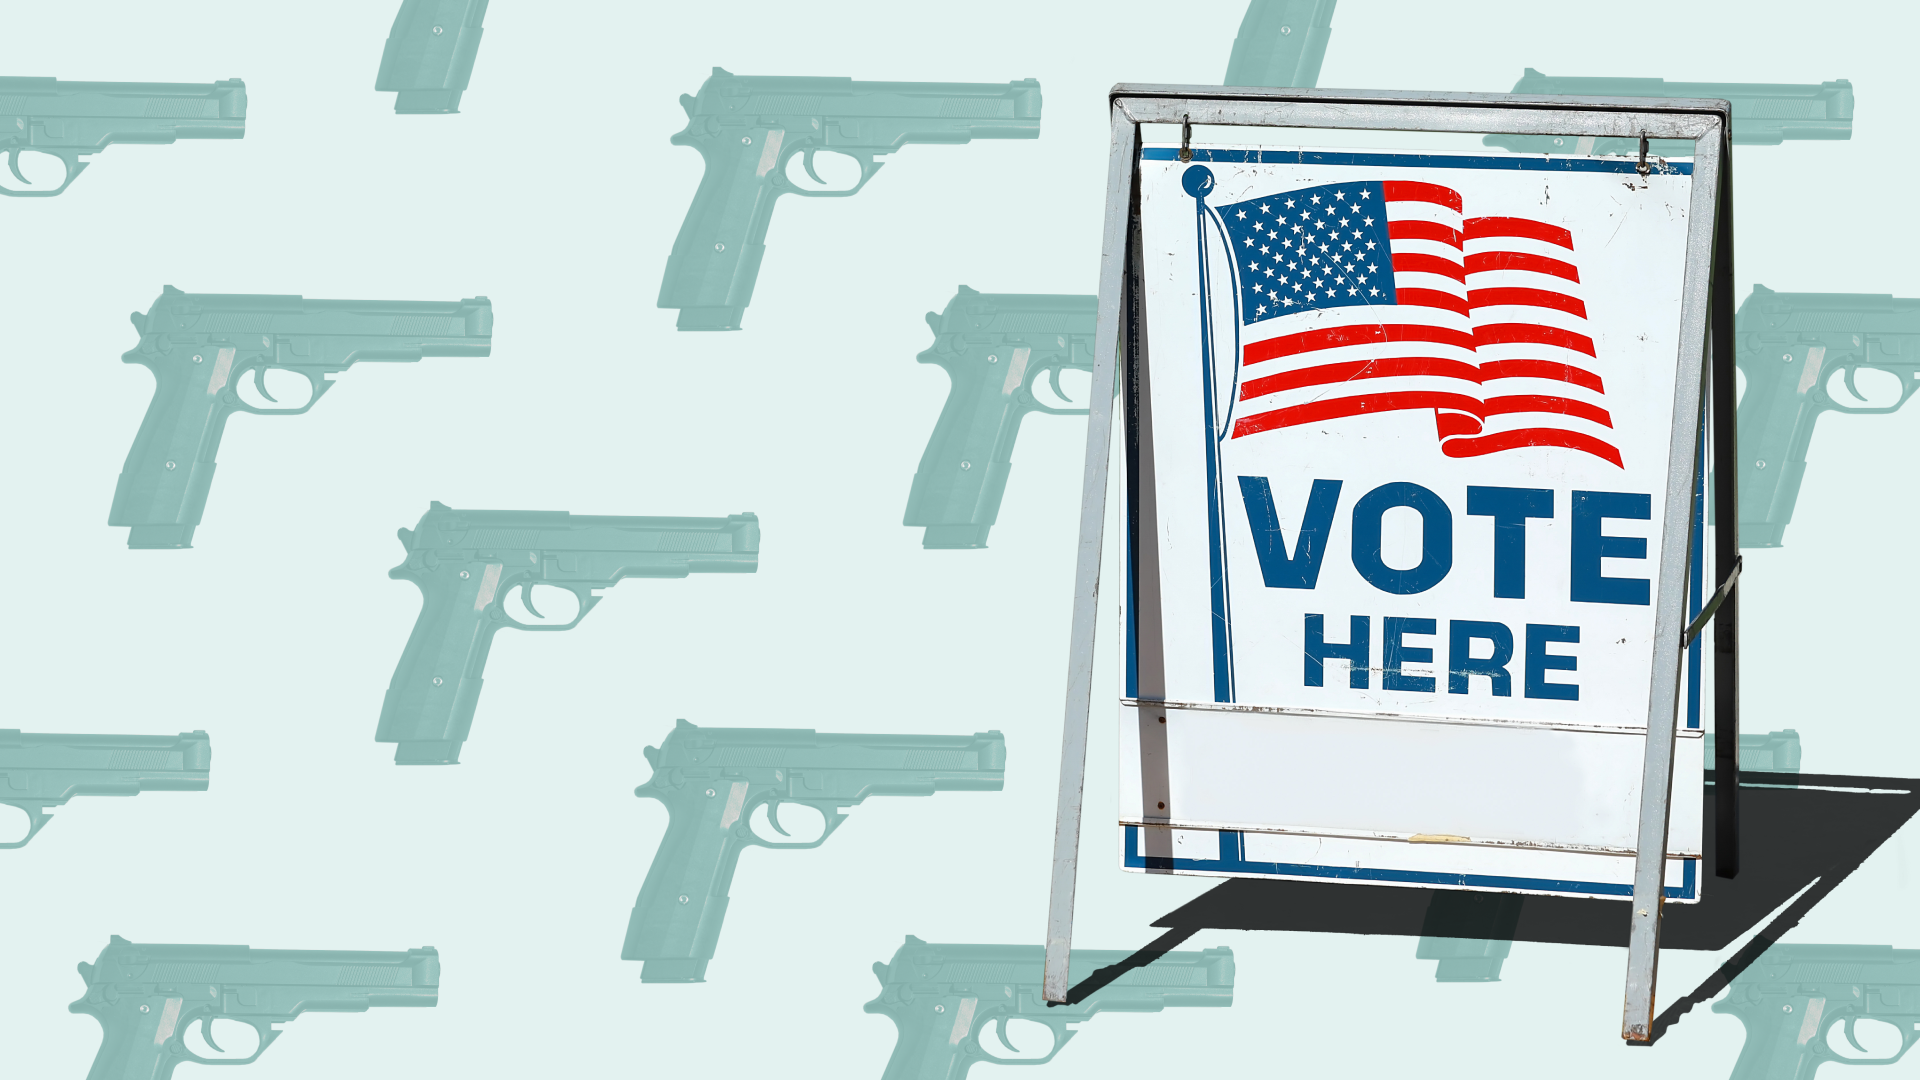 Vote here sign with guns in the background